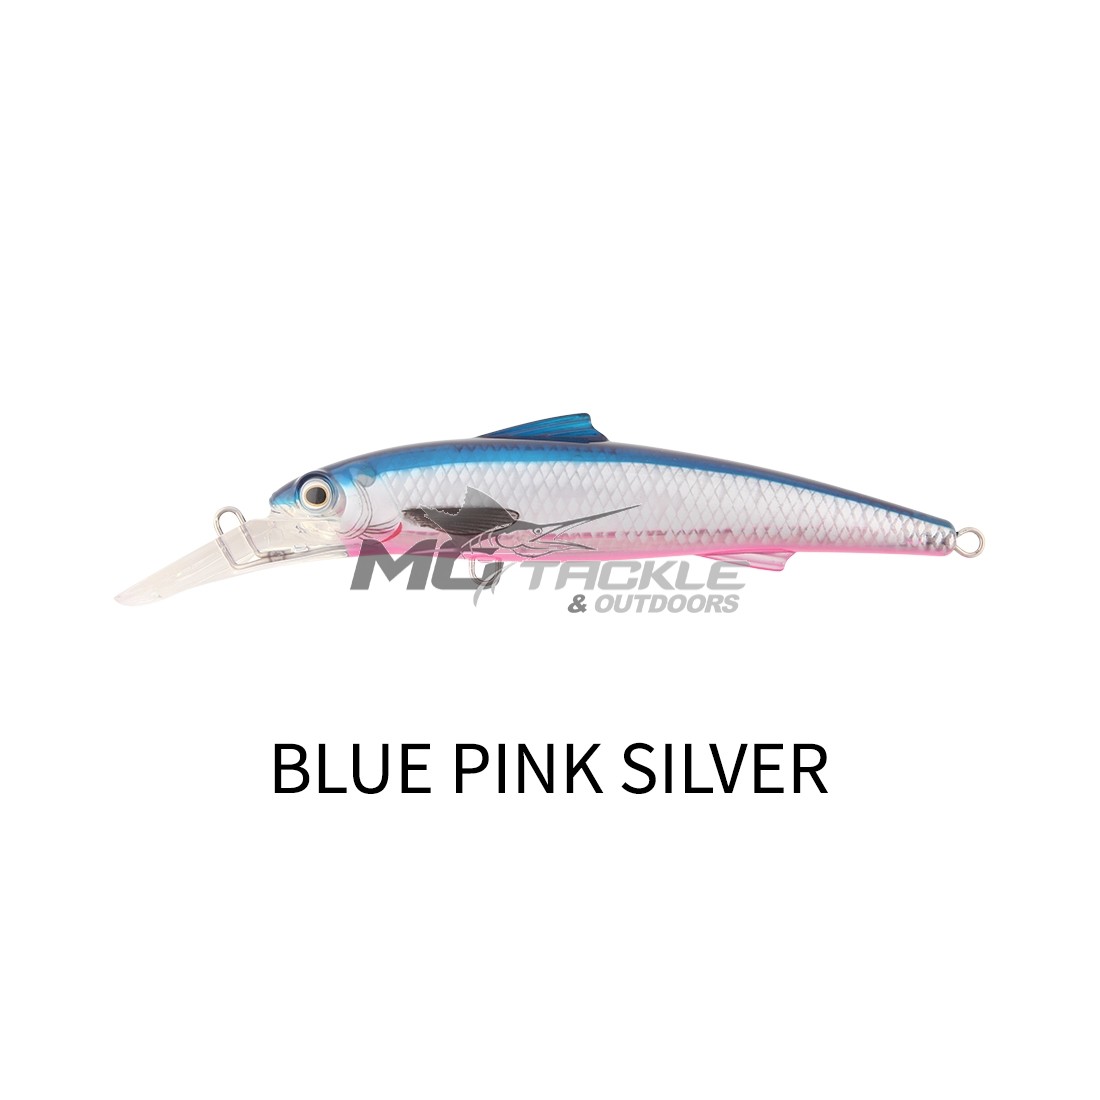 Lure of the week. Samaki Pacemaker bluewater trolling lure. 140mm and